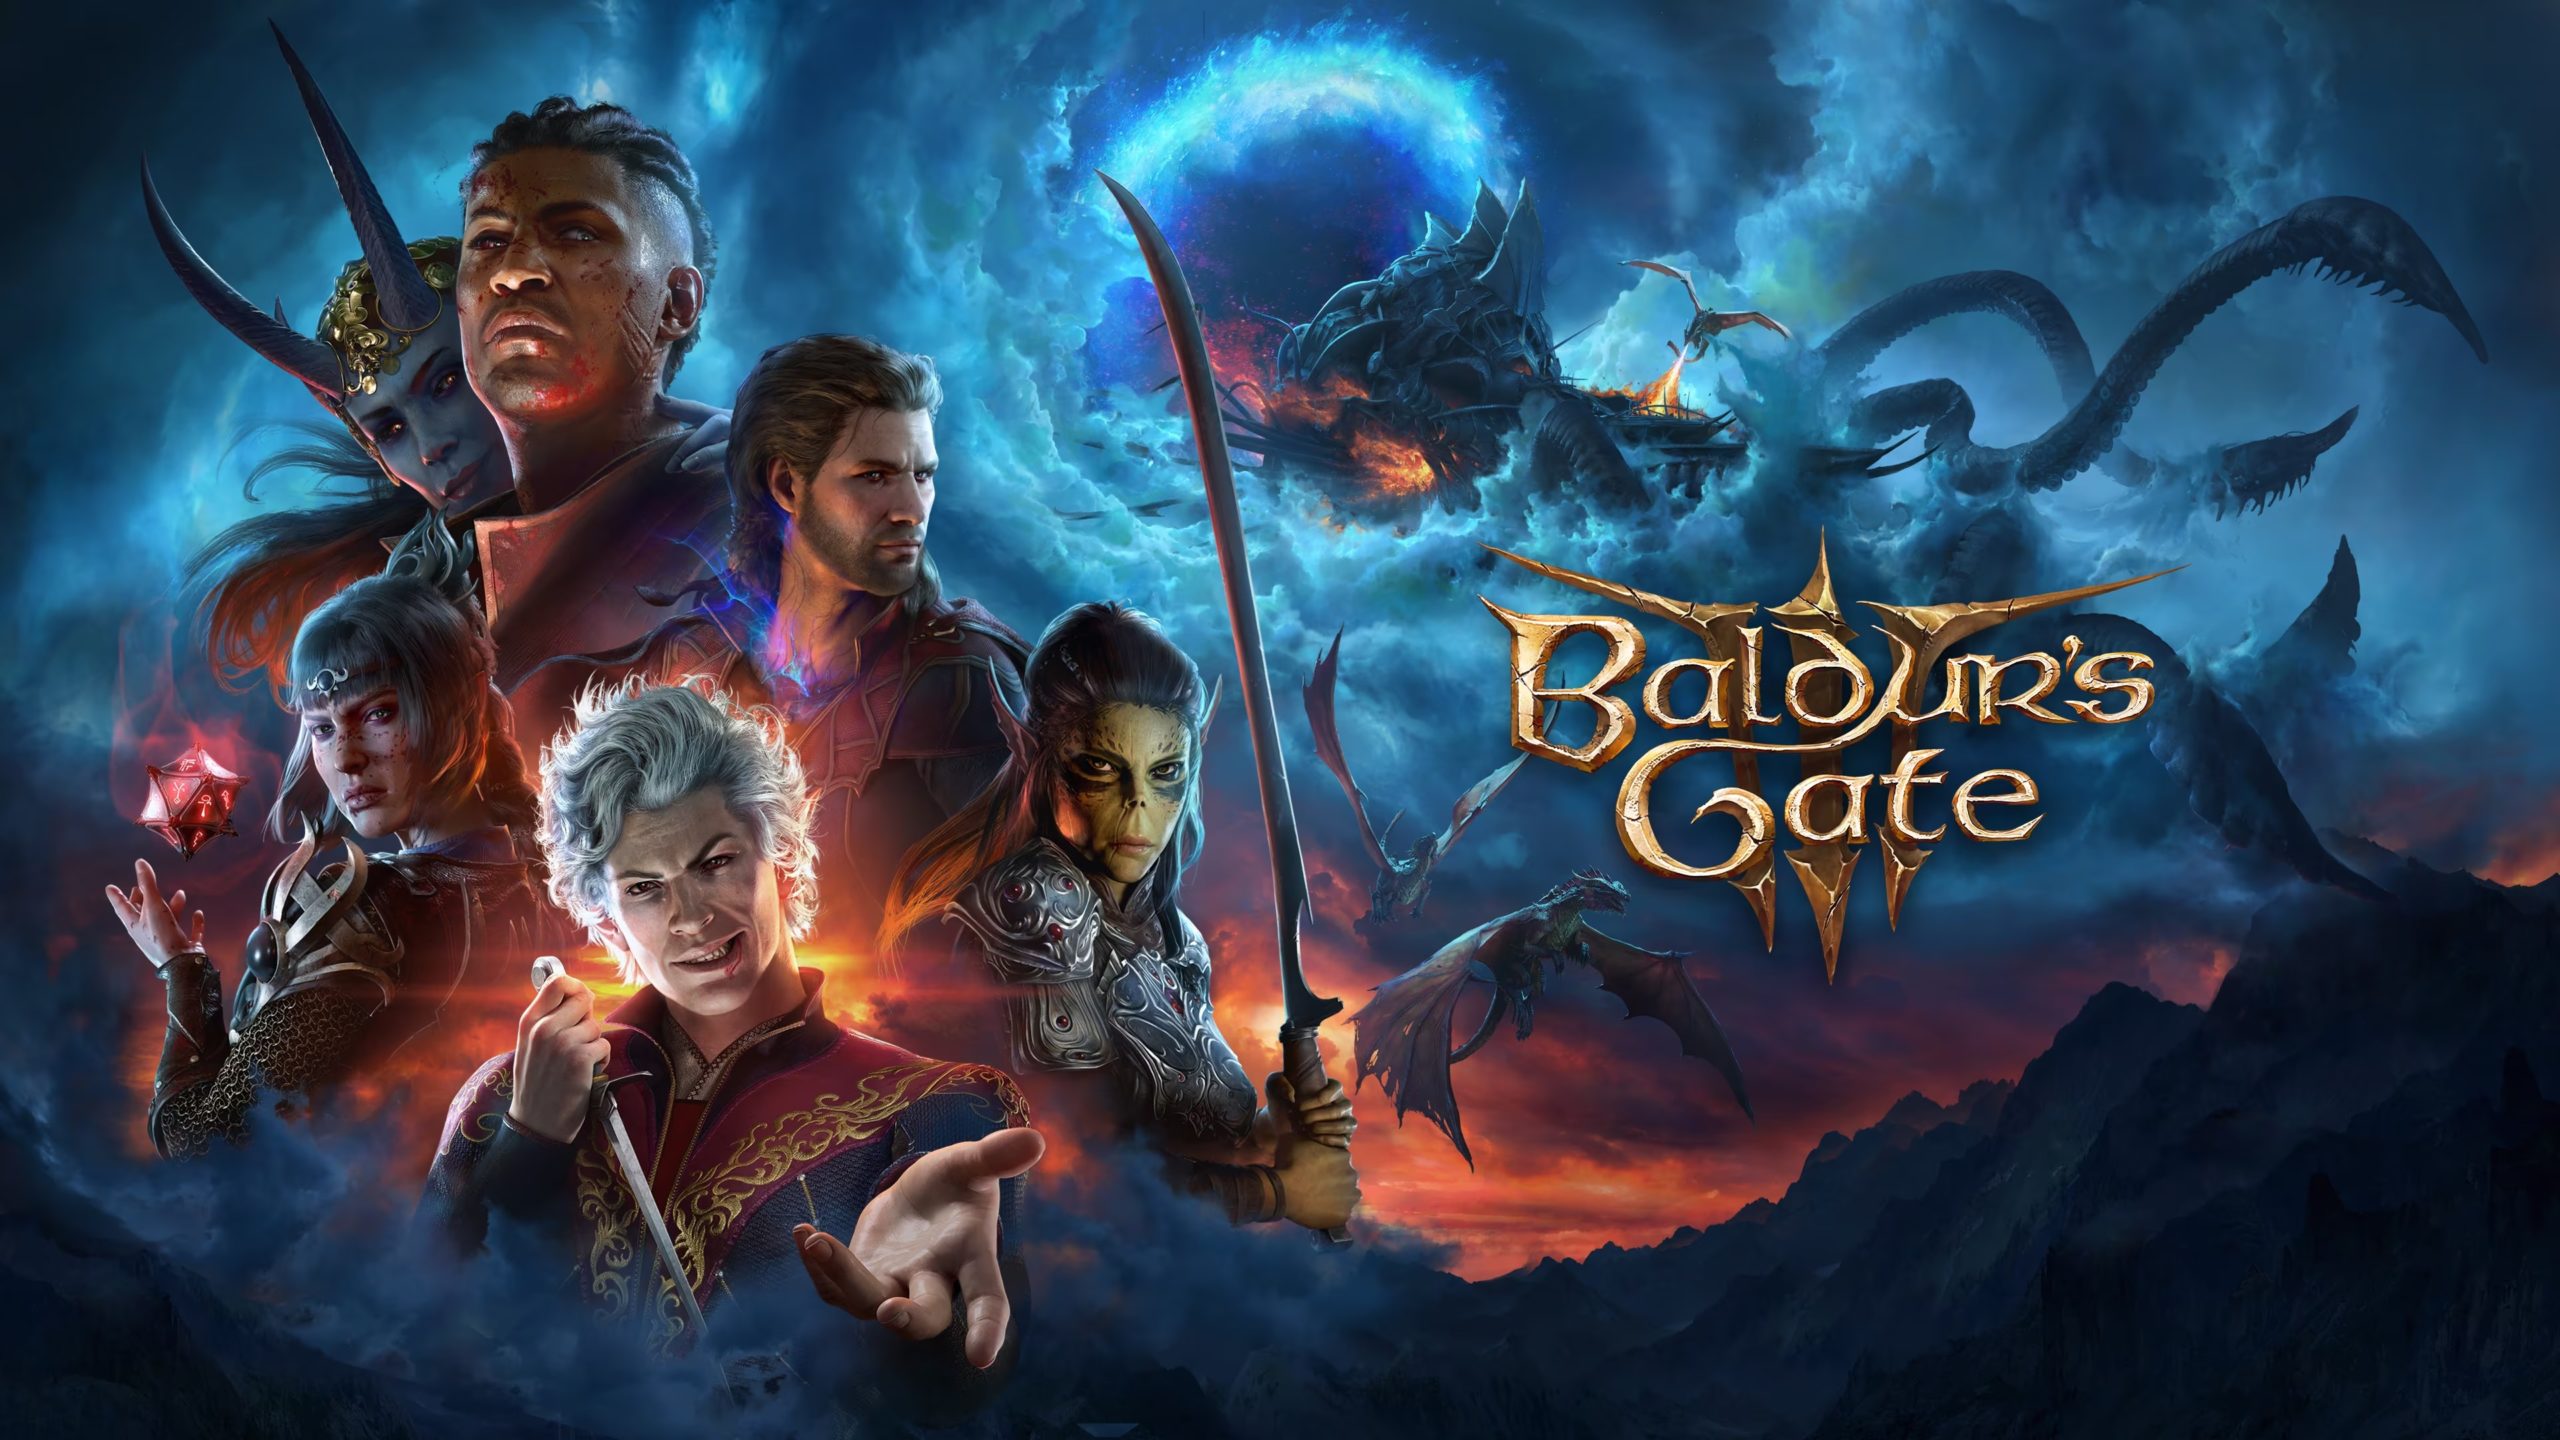 Baldur’s Gate 3 Is The Most Pre-Ordered Game On PlayStation Store With Over 800,000 Concurrent Players On Steam